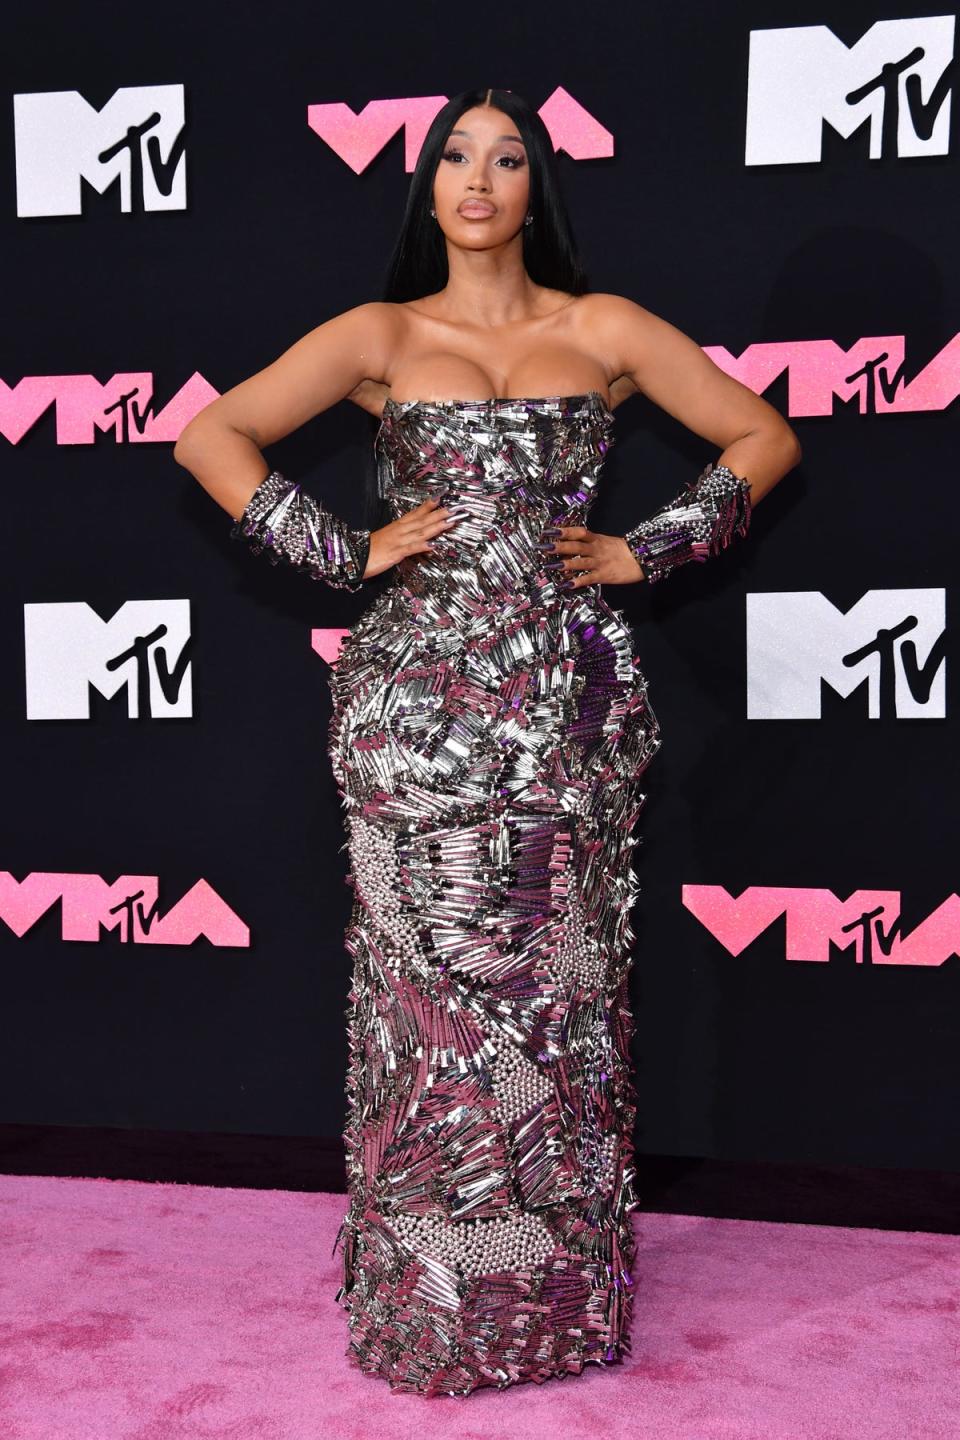  (Getty Images for MTV)